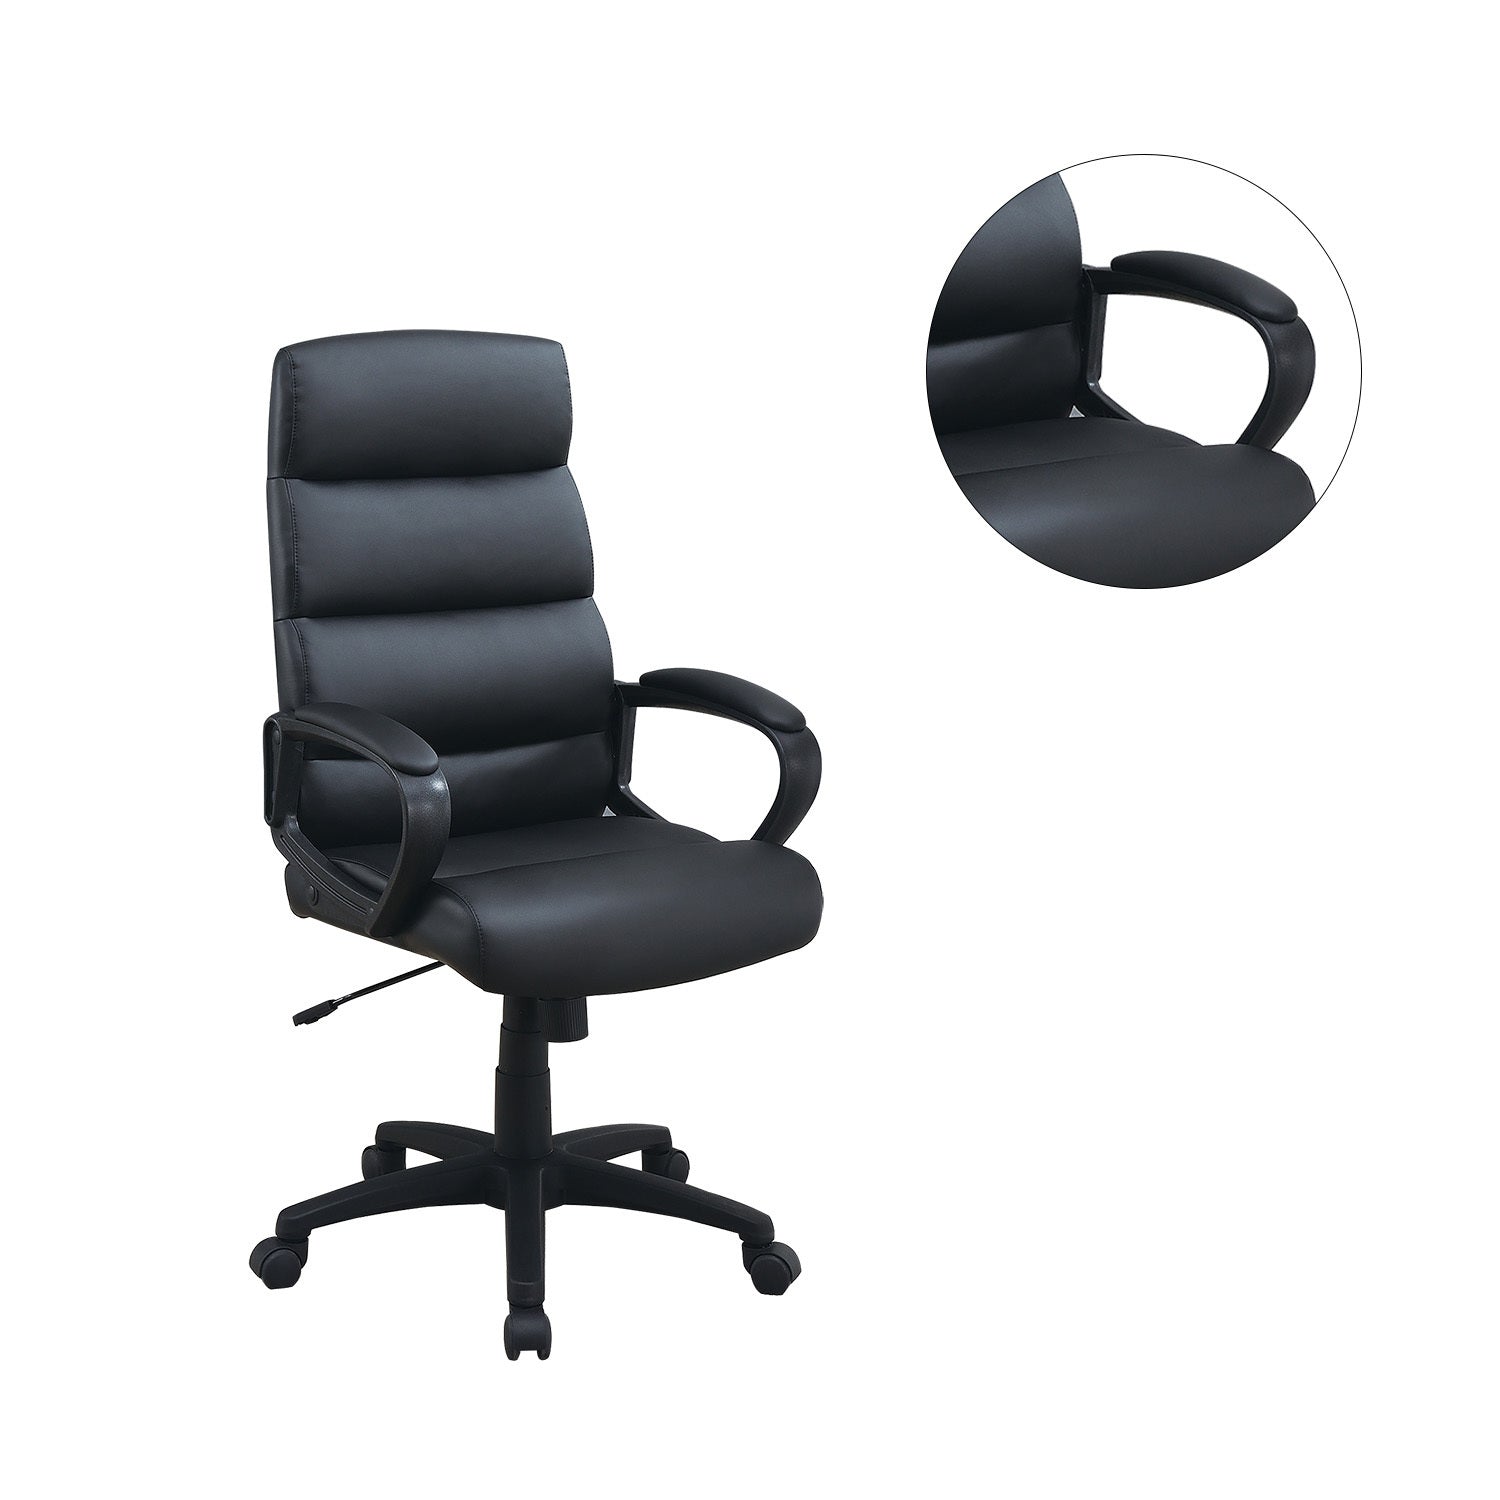 High-Back Adjustable Height Office Chair (Black)